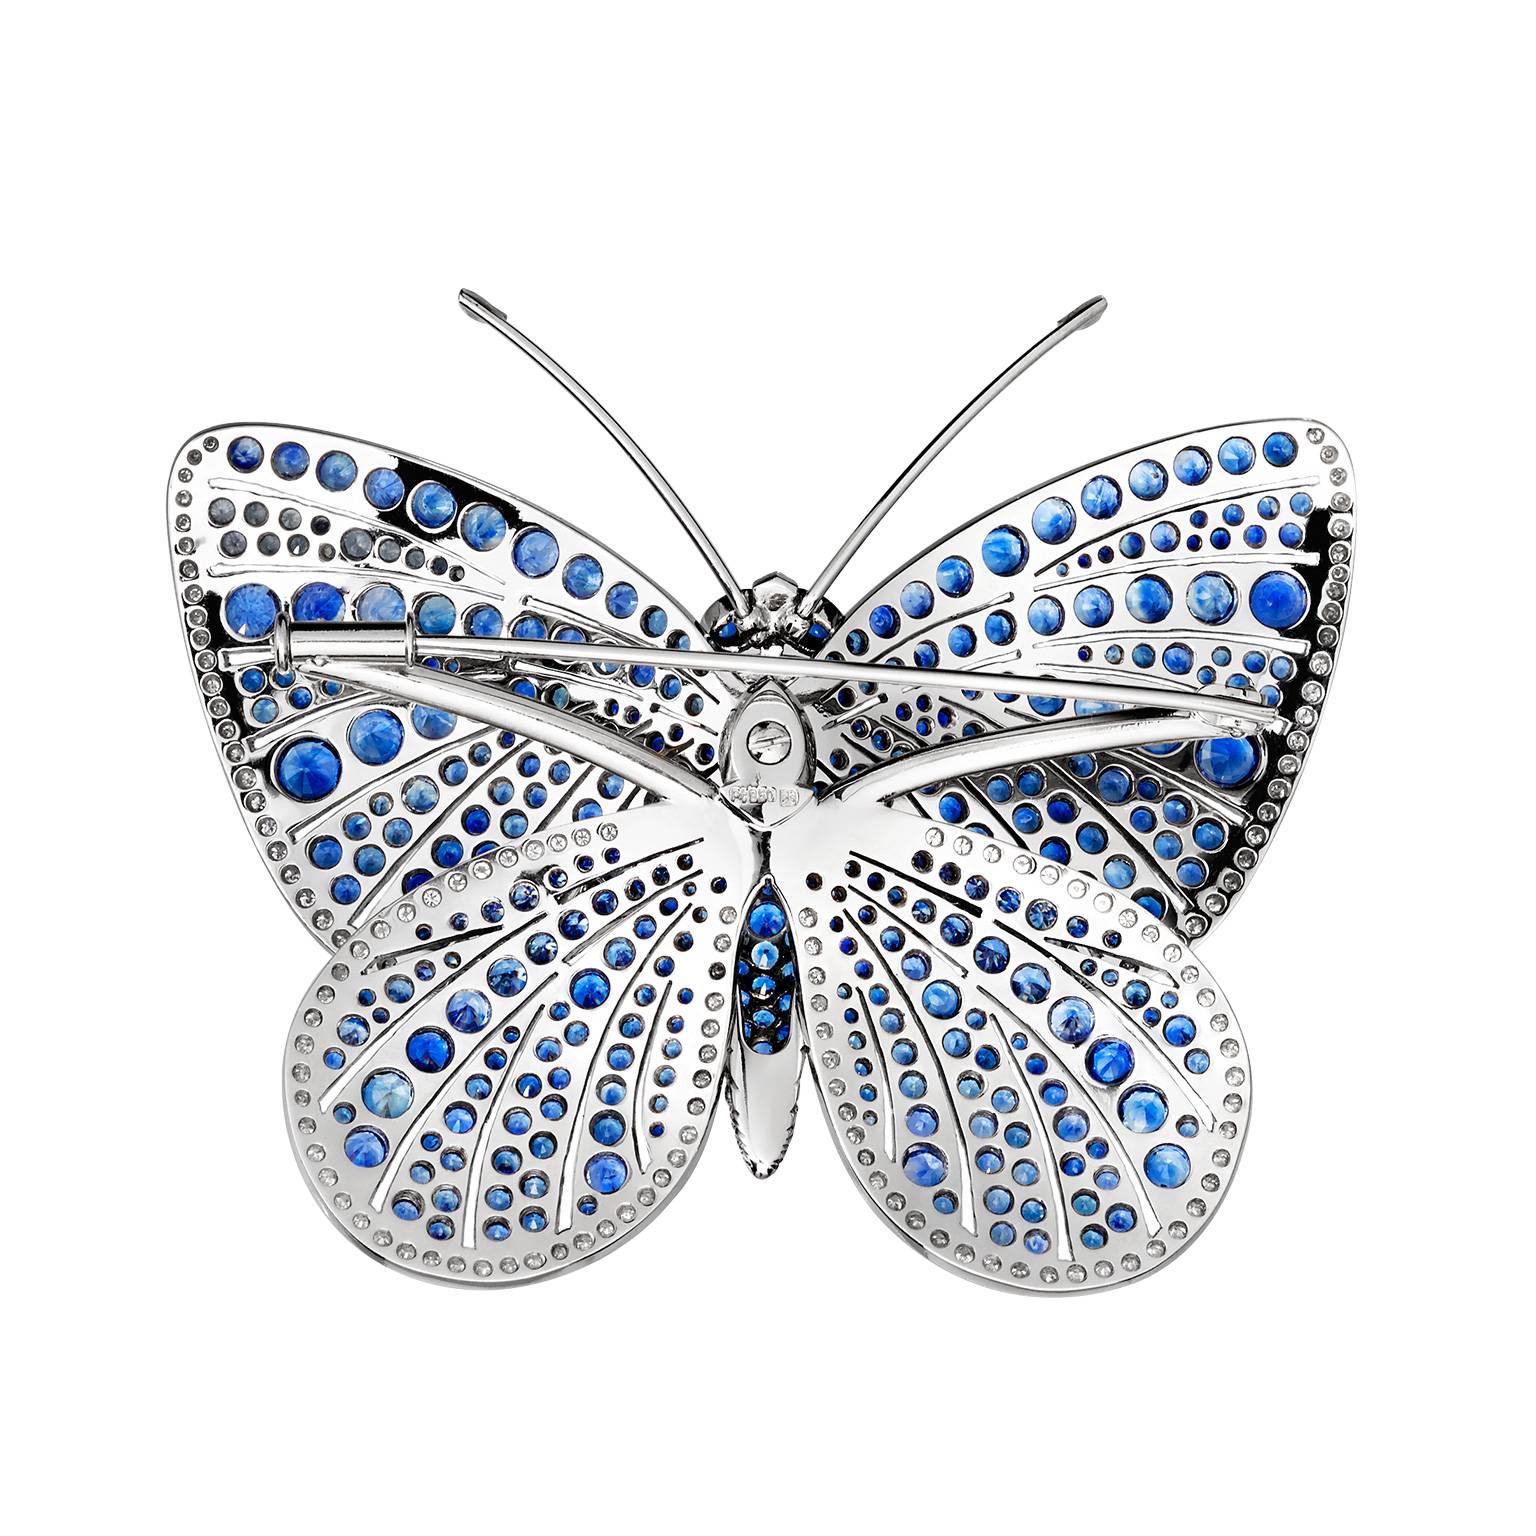 The Holly Blue

The body of the Holly Blue features a unique sapphire with
a truly captivating appearance. The 4.26 carat antique-cut sapphire stands out for its untreated cornflower blue color. The gem is a miracle of nature – perfectly shaped by